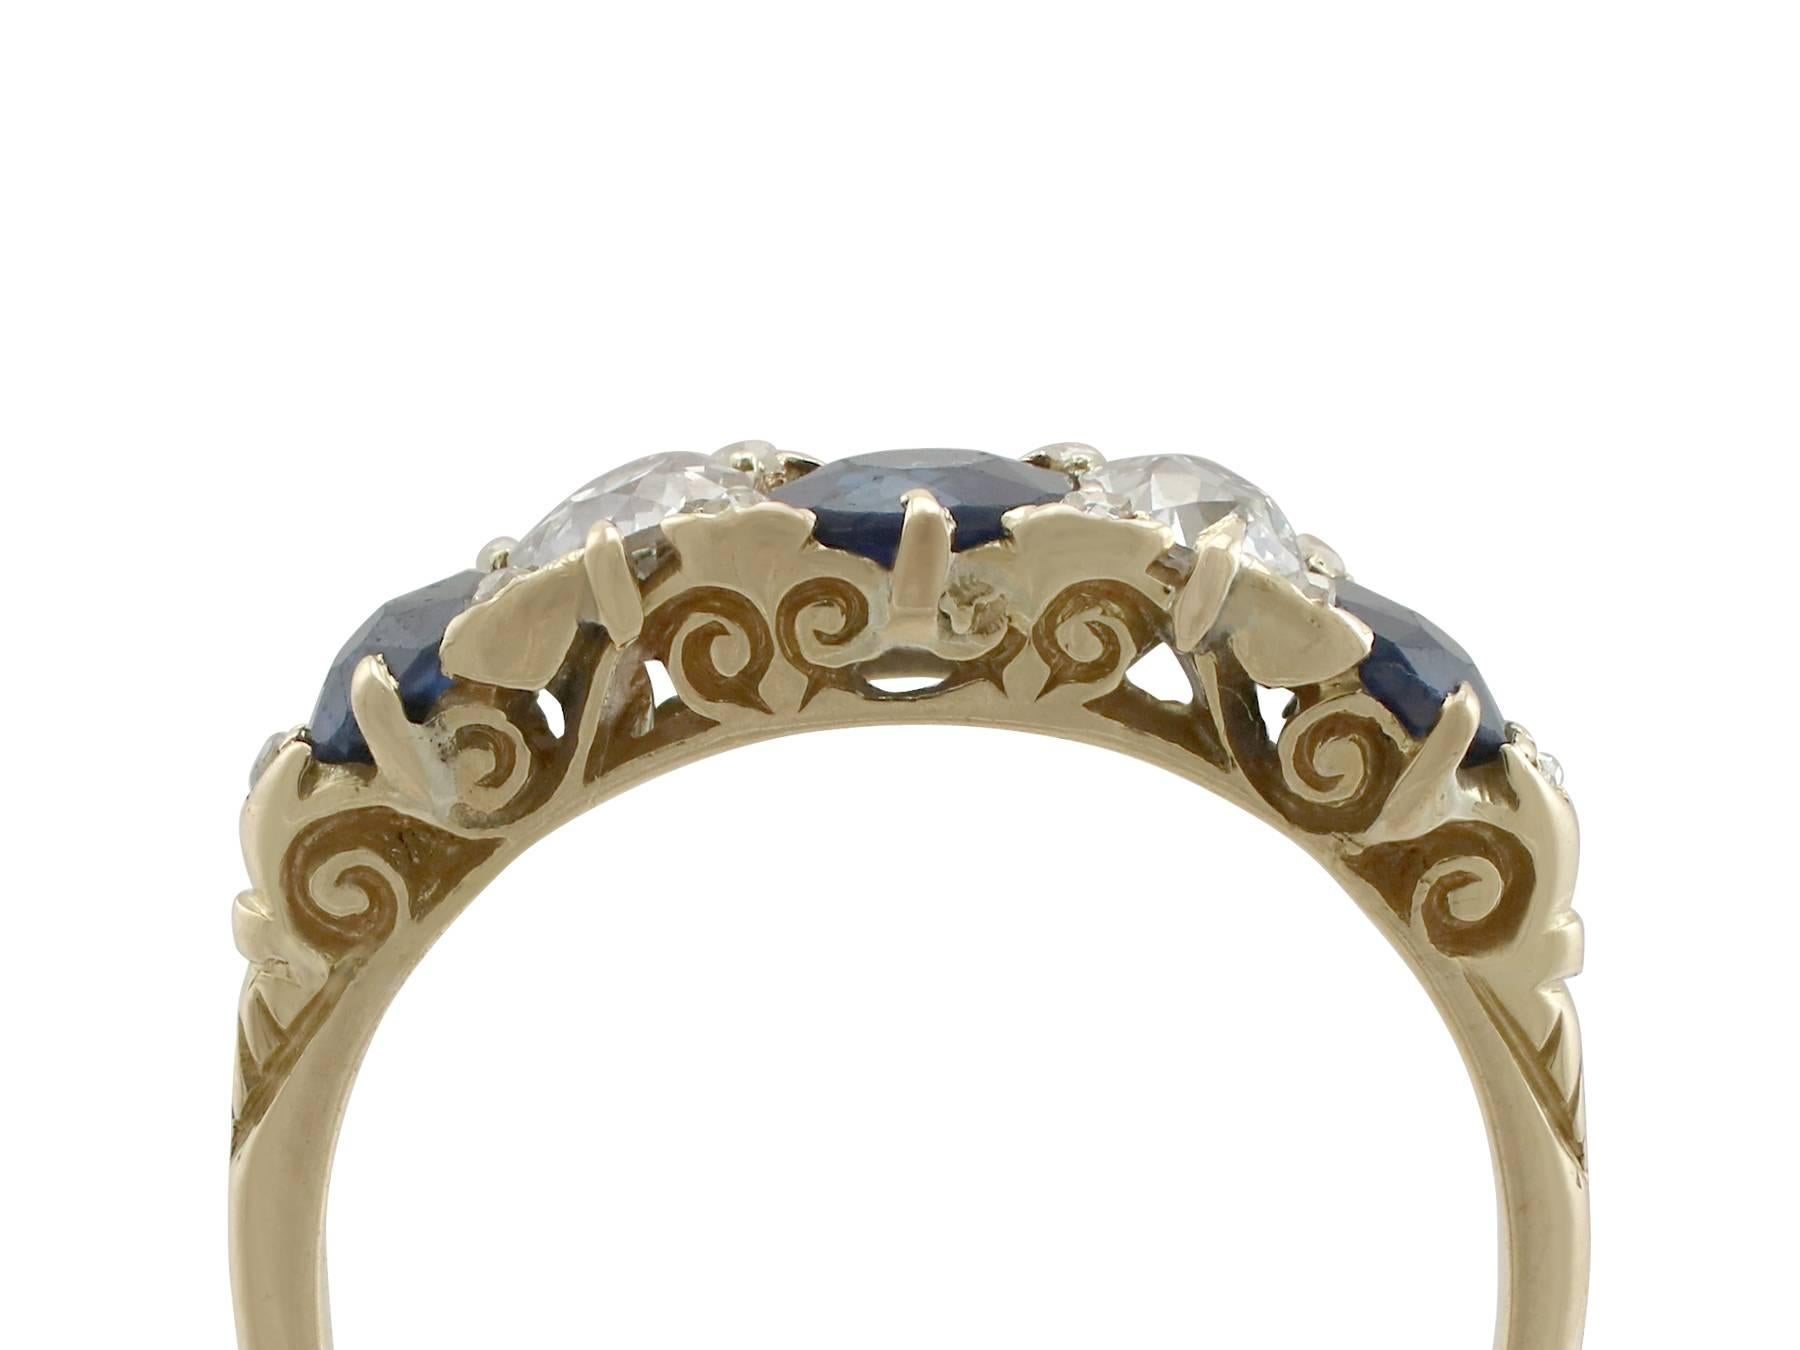 An impressive 0.68 carat blue sapphire and 0.43 carat diamond, 18 karat yellow gold five stone cocktail ring; part of our diverse antique jewelry and estate jewelry collections

This fine and impressive antique diamond ring has been crafted in 18 k